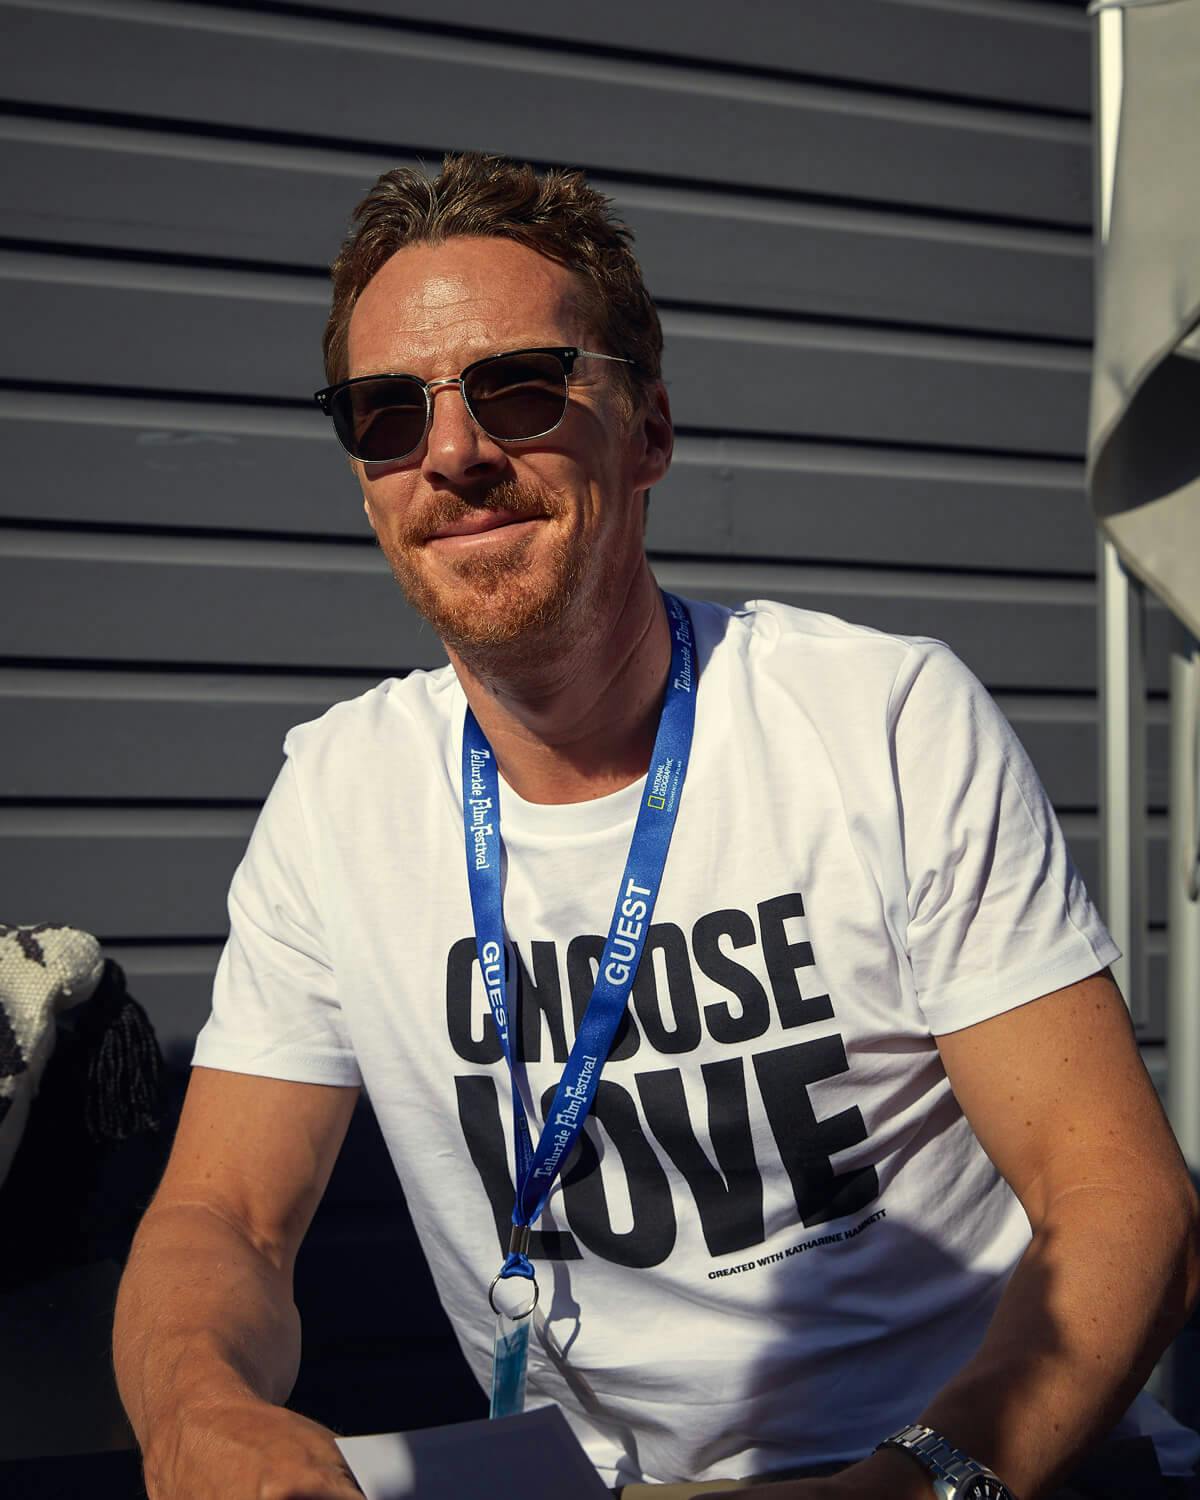 Benedict Cumberbatch wears a white t-shirt reading “Choose Love” and wearing sunglasses sits outside at the Telluride Film Festival, 2021.